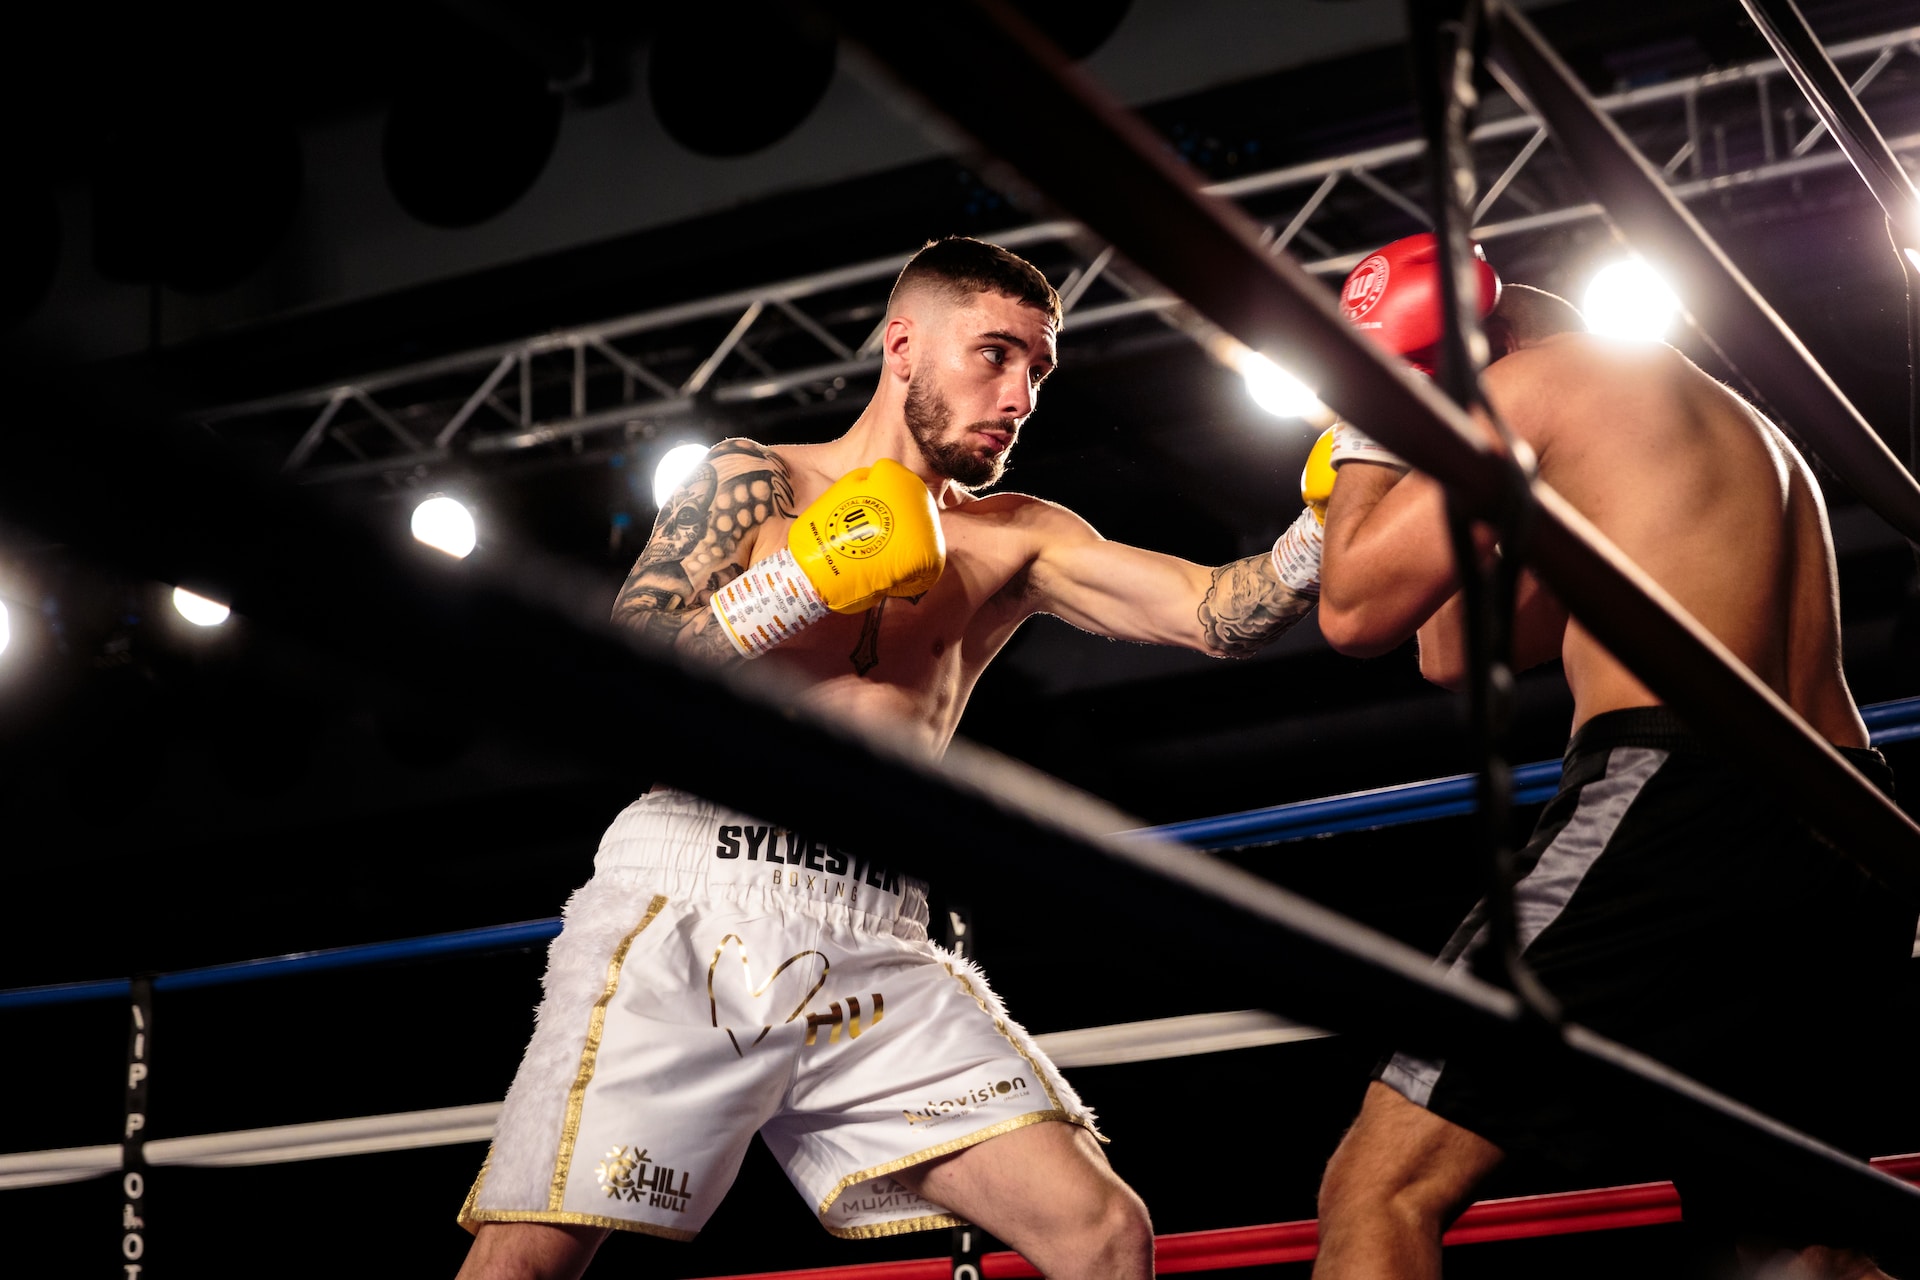 Uk, Doncaster, Boxing, Box, Punch, Professional, Boxer, Athlete, Human, Sports Images, Lewis Sylvester